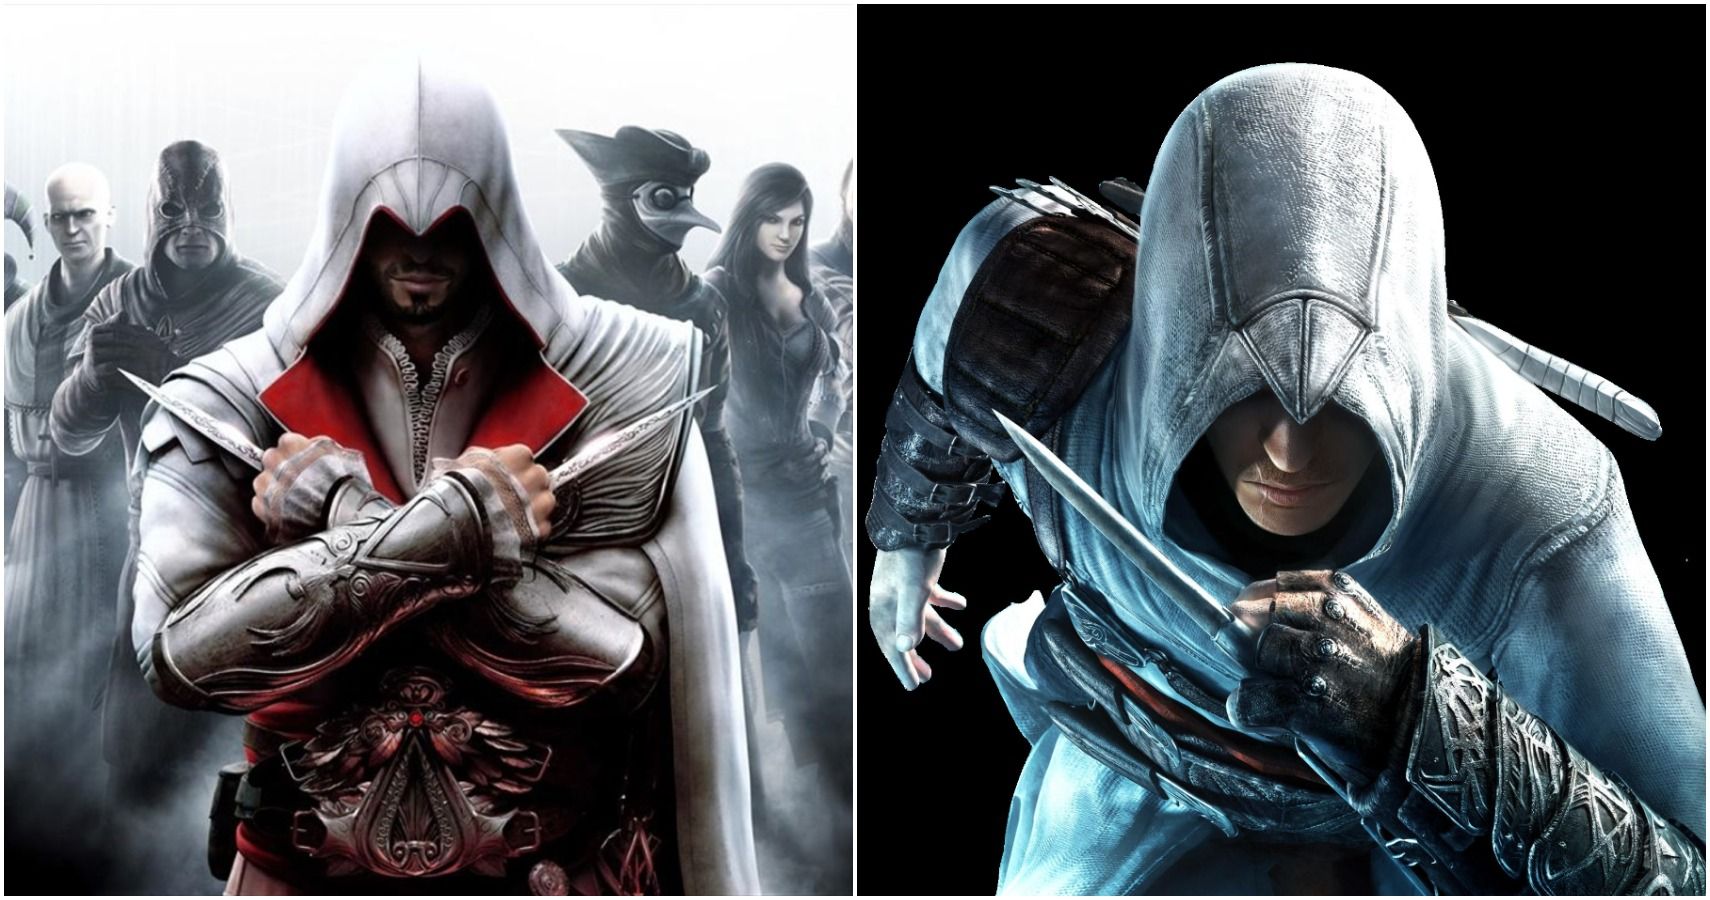 Assassins Creed 5 Reasons Why Altair Is The Best Assassin And 5 Why Its Ezio